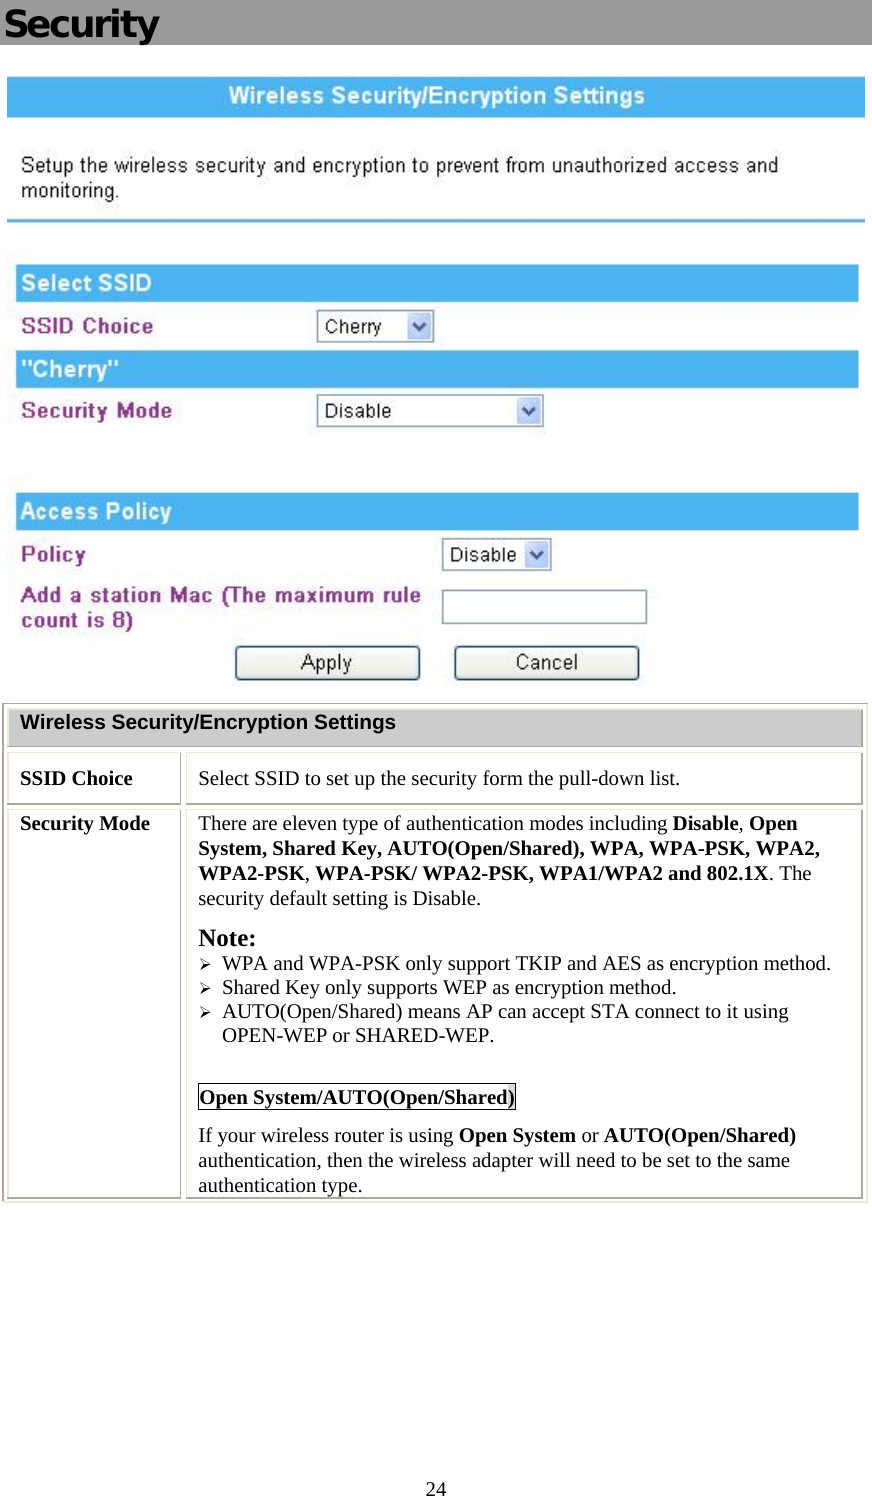   24Security  Wireless Security/Encryption Settings SSID Choice  Select SSID to set up the security form the pull-down list. Security Mode  There are eleven type of authentication modes including Disable, Open System, Shared Key, AUTO(Open/Shared), WPA, WPA-PSK, WPA2, WPA2-PSK, WPA-PSK/ WPA2-PSK, WPA1/WPA2 and 802.1X. The security default setting is Disable. Note:  ¾ WPA and WPA-PSK only support TKIP and AES as encryption method. ¾ Shared Key only supports WEP as encryption method. ¾ AUTO(Open/Shared) means AP can accept STA connect to it using OPEN-WEP or SHARED-WEP.  Open System/AUTO(Open/Shared) If your wireless router is using Open System or AUTO(Open/Shared) authentication, then the wireless adapter will need to be set to the same authentication type.  